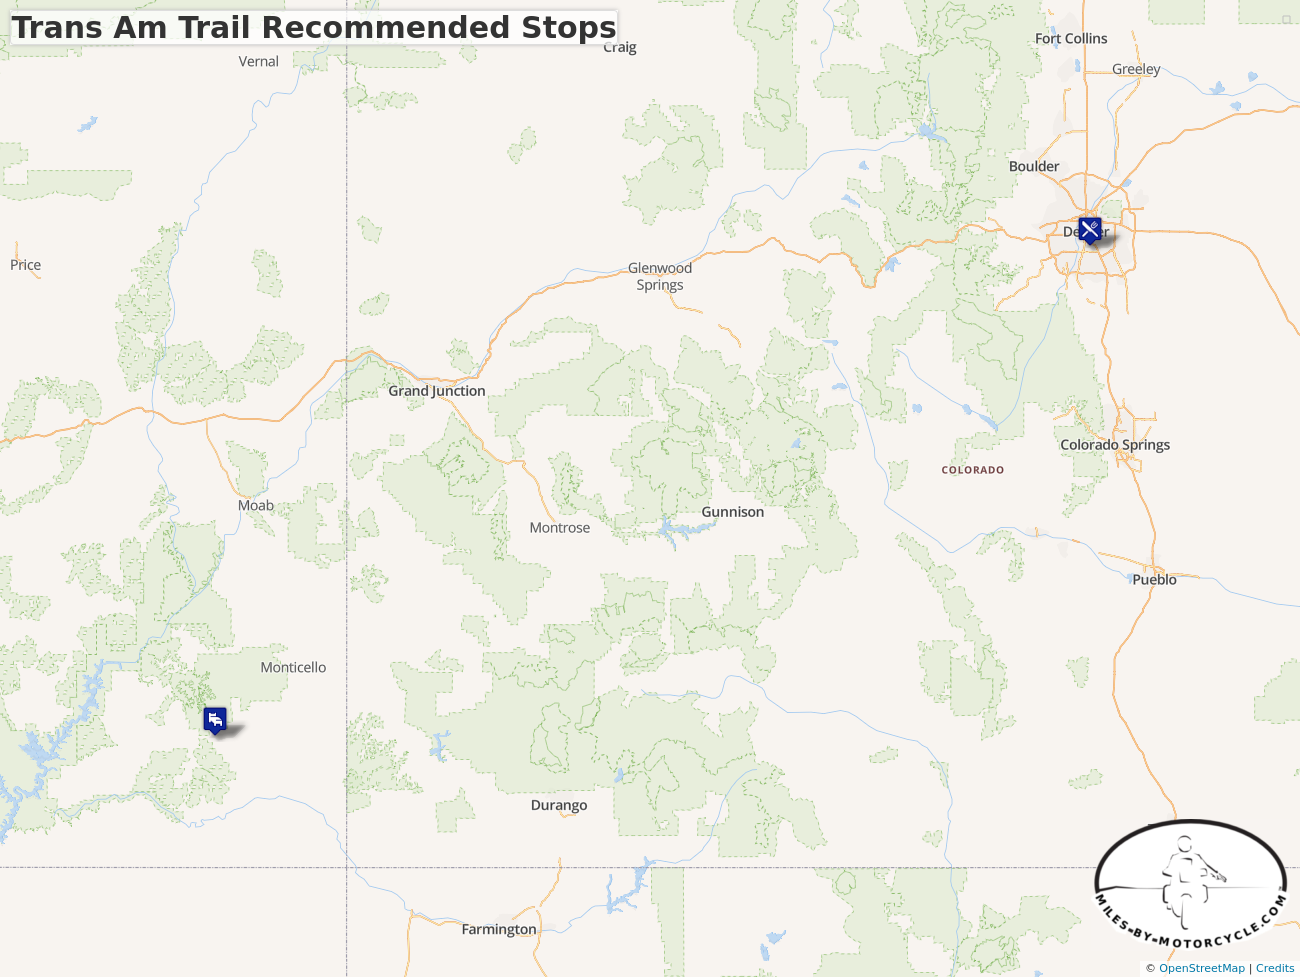 Trans Am Trail Recommended Stops